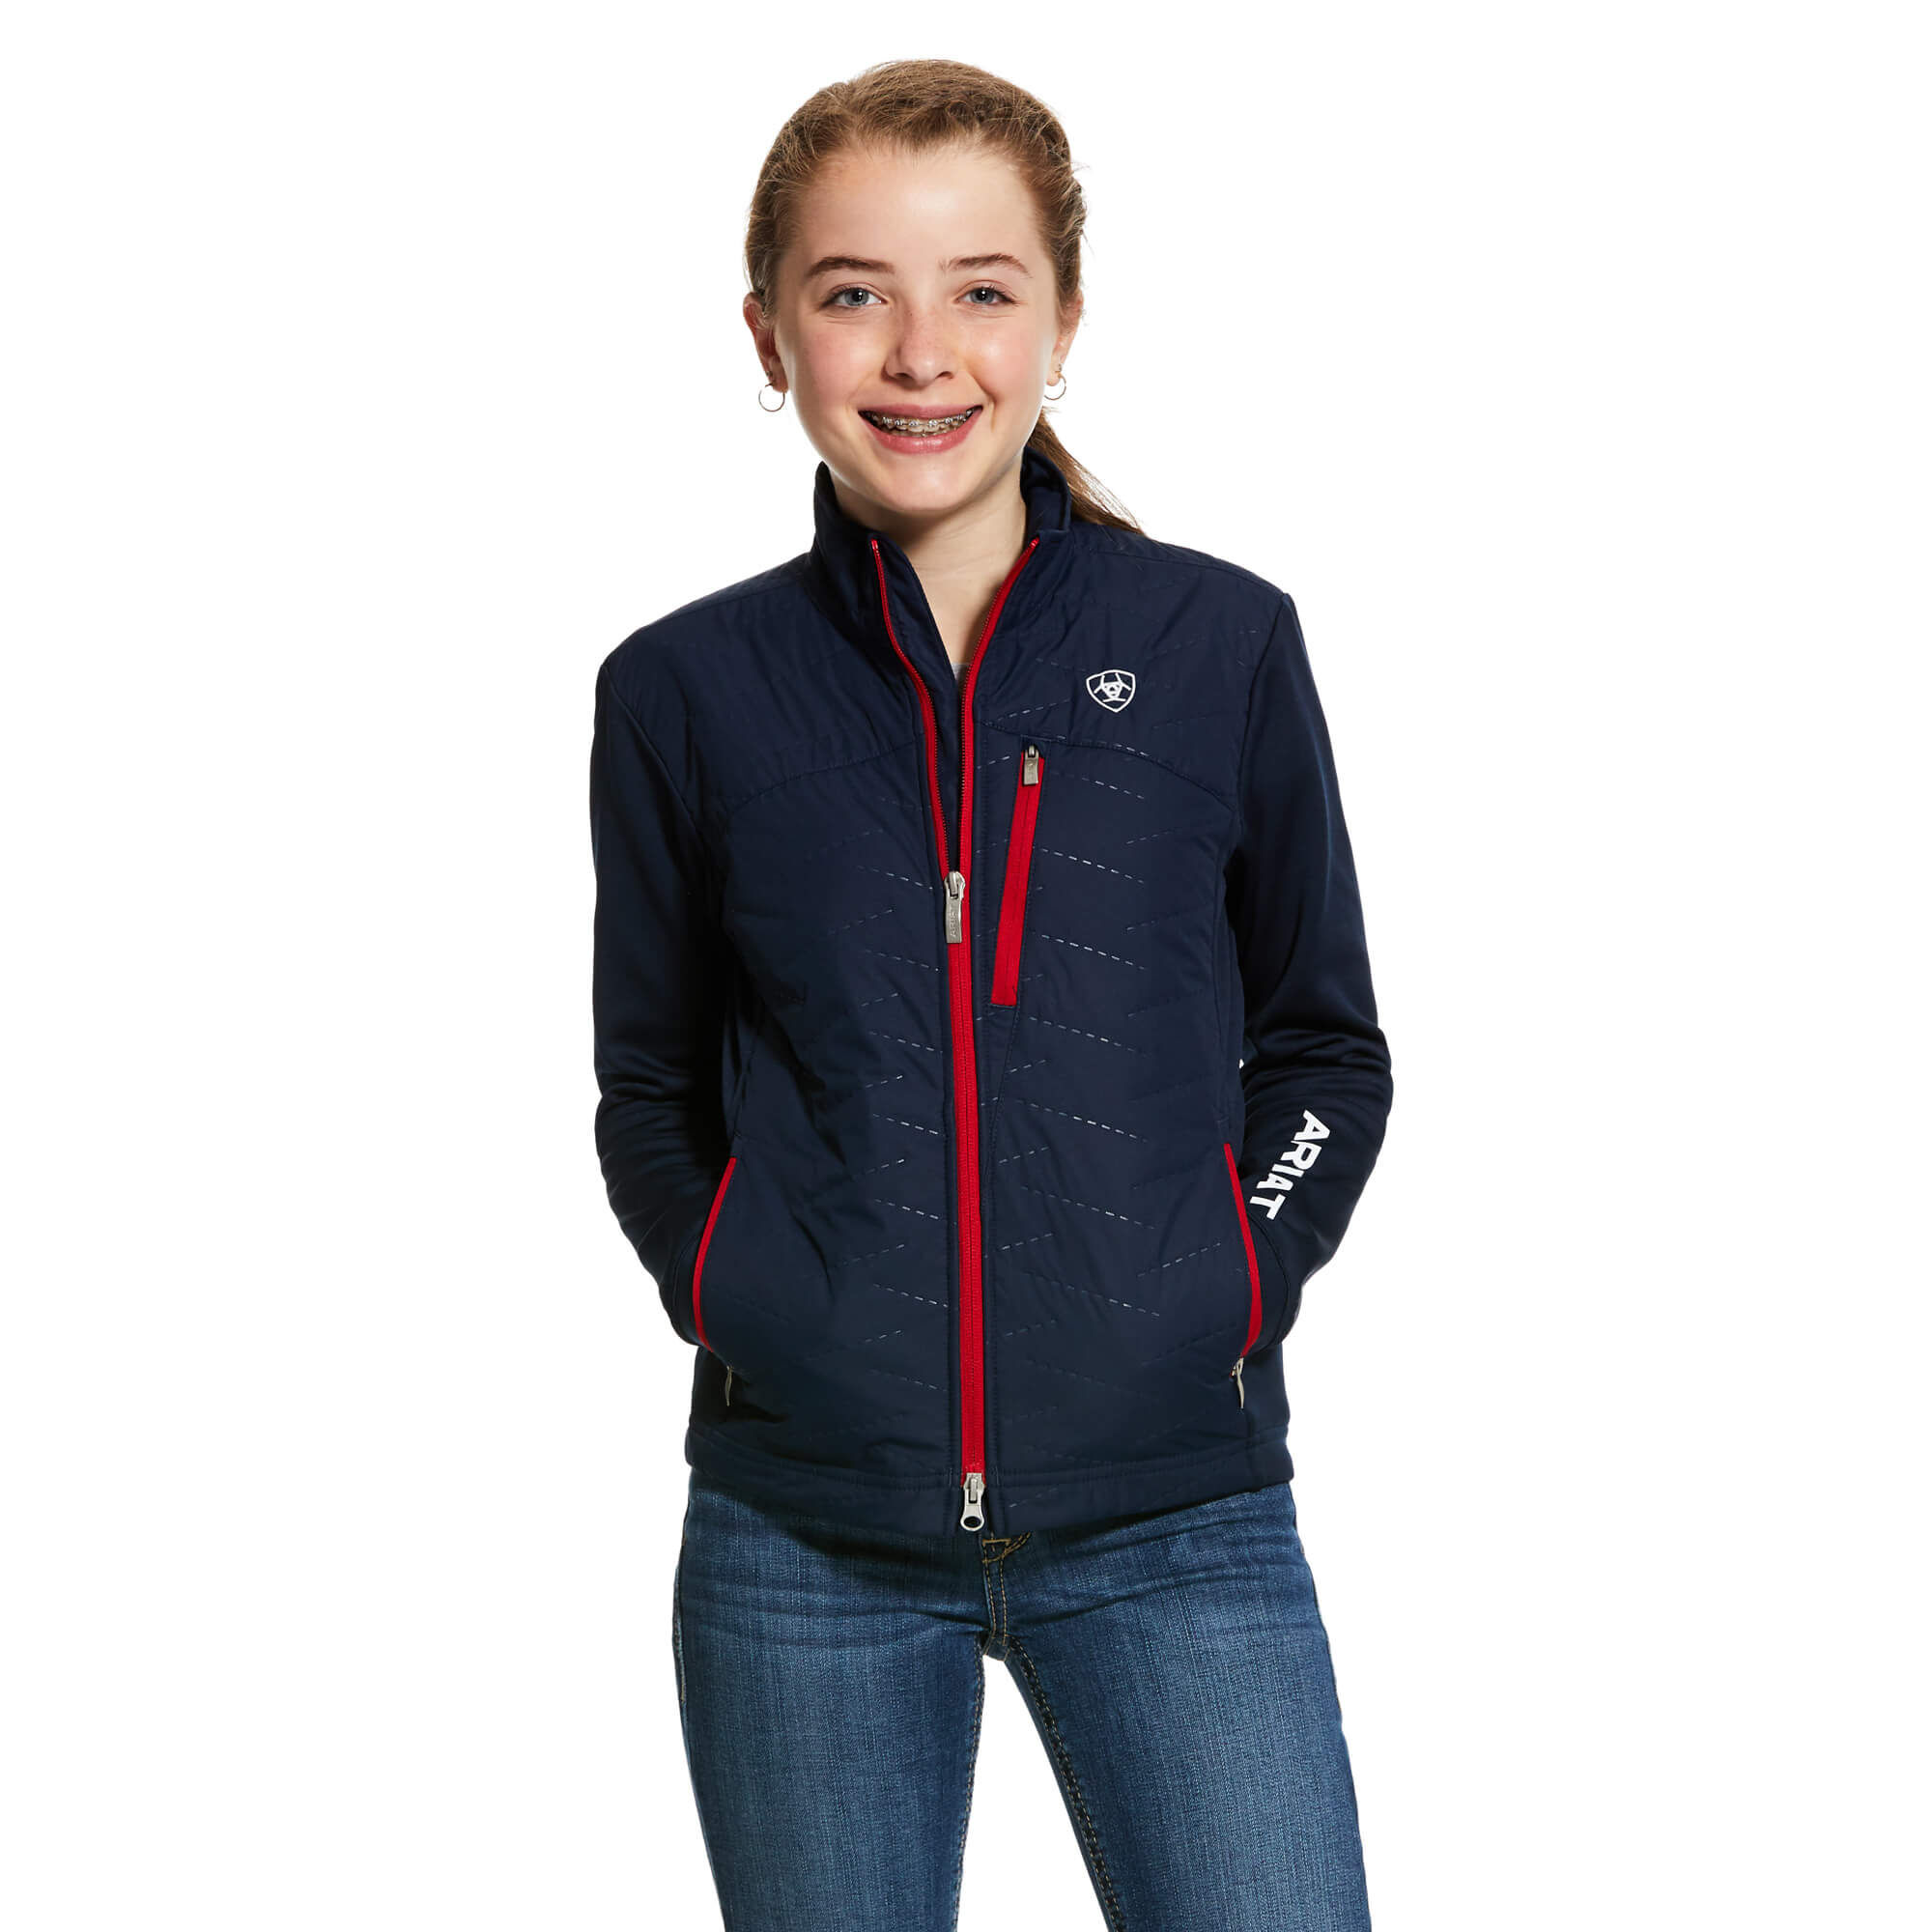 Ariat Stable Team Jacket Kids/Youth 10009735